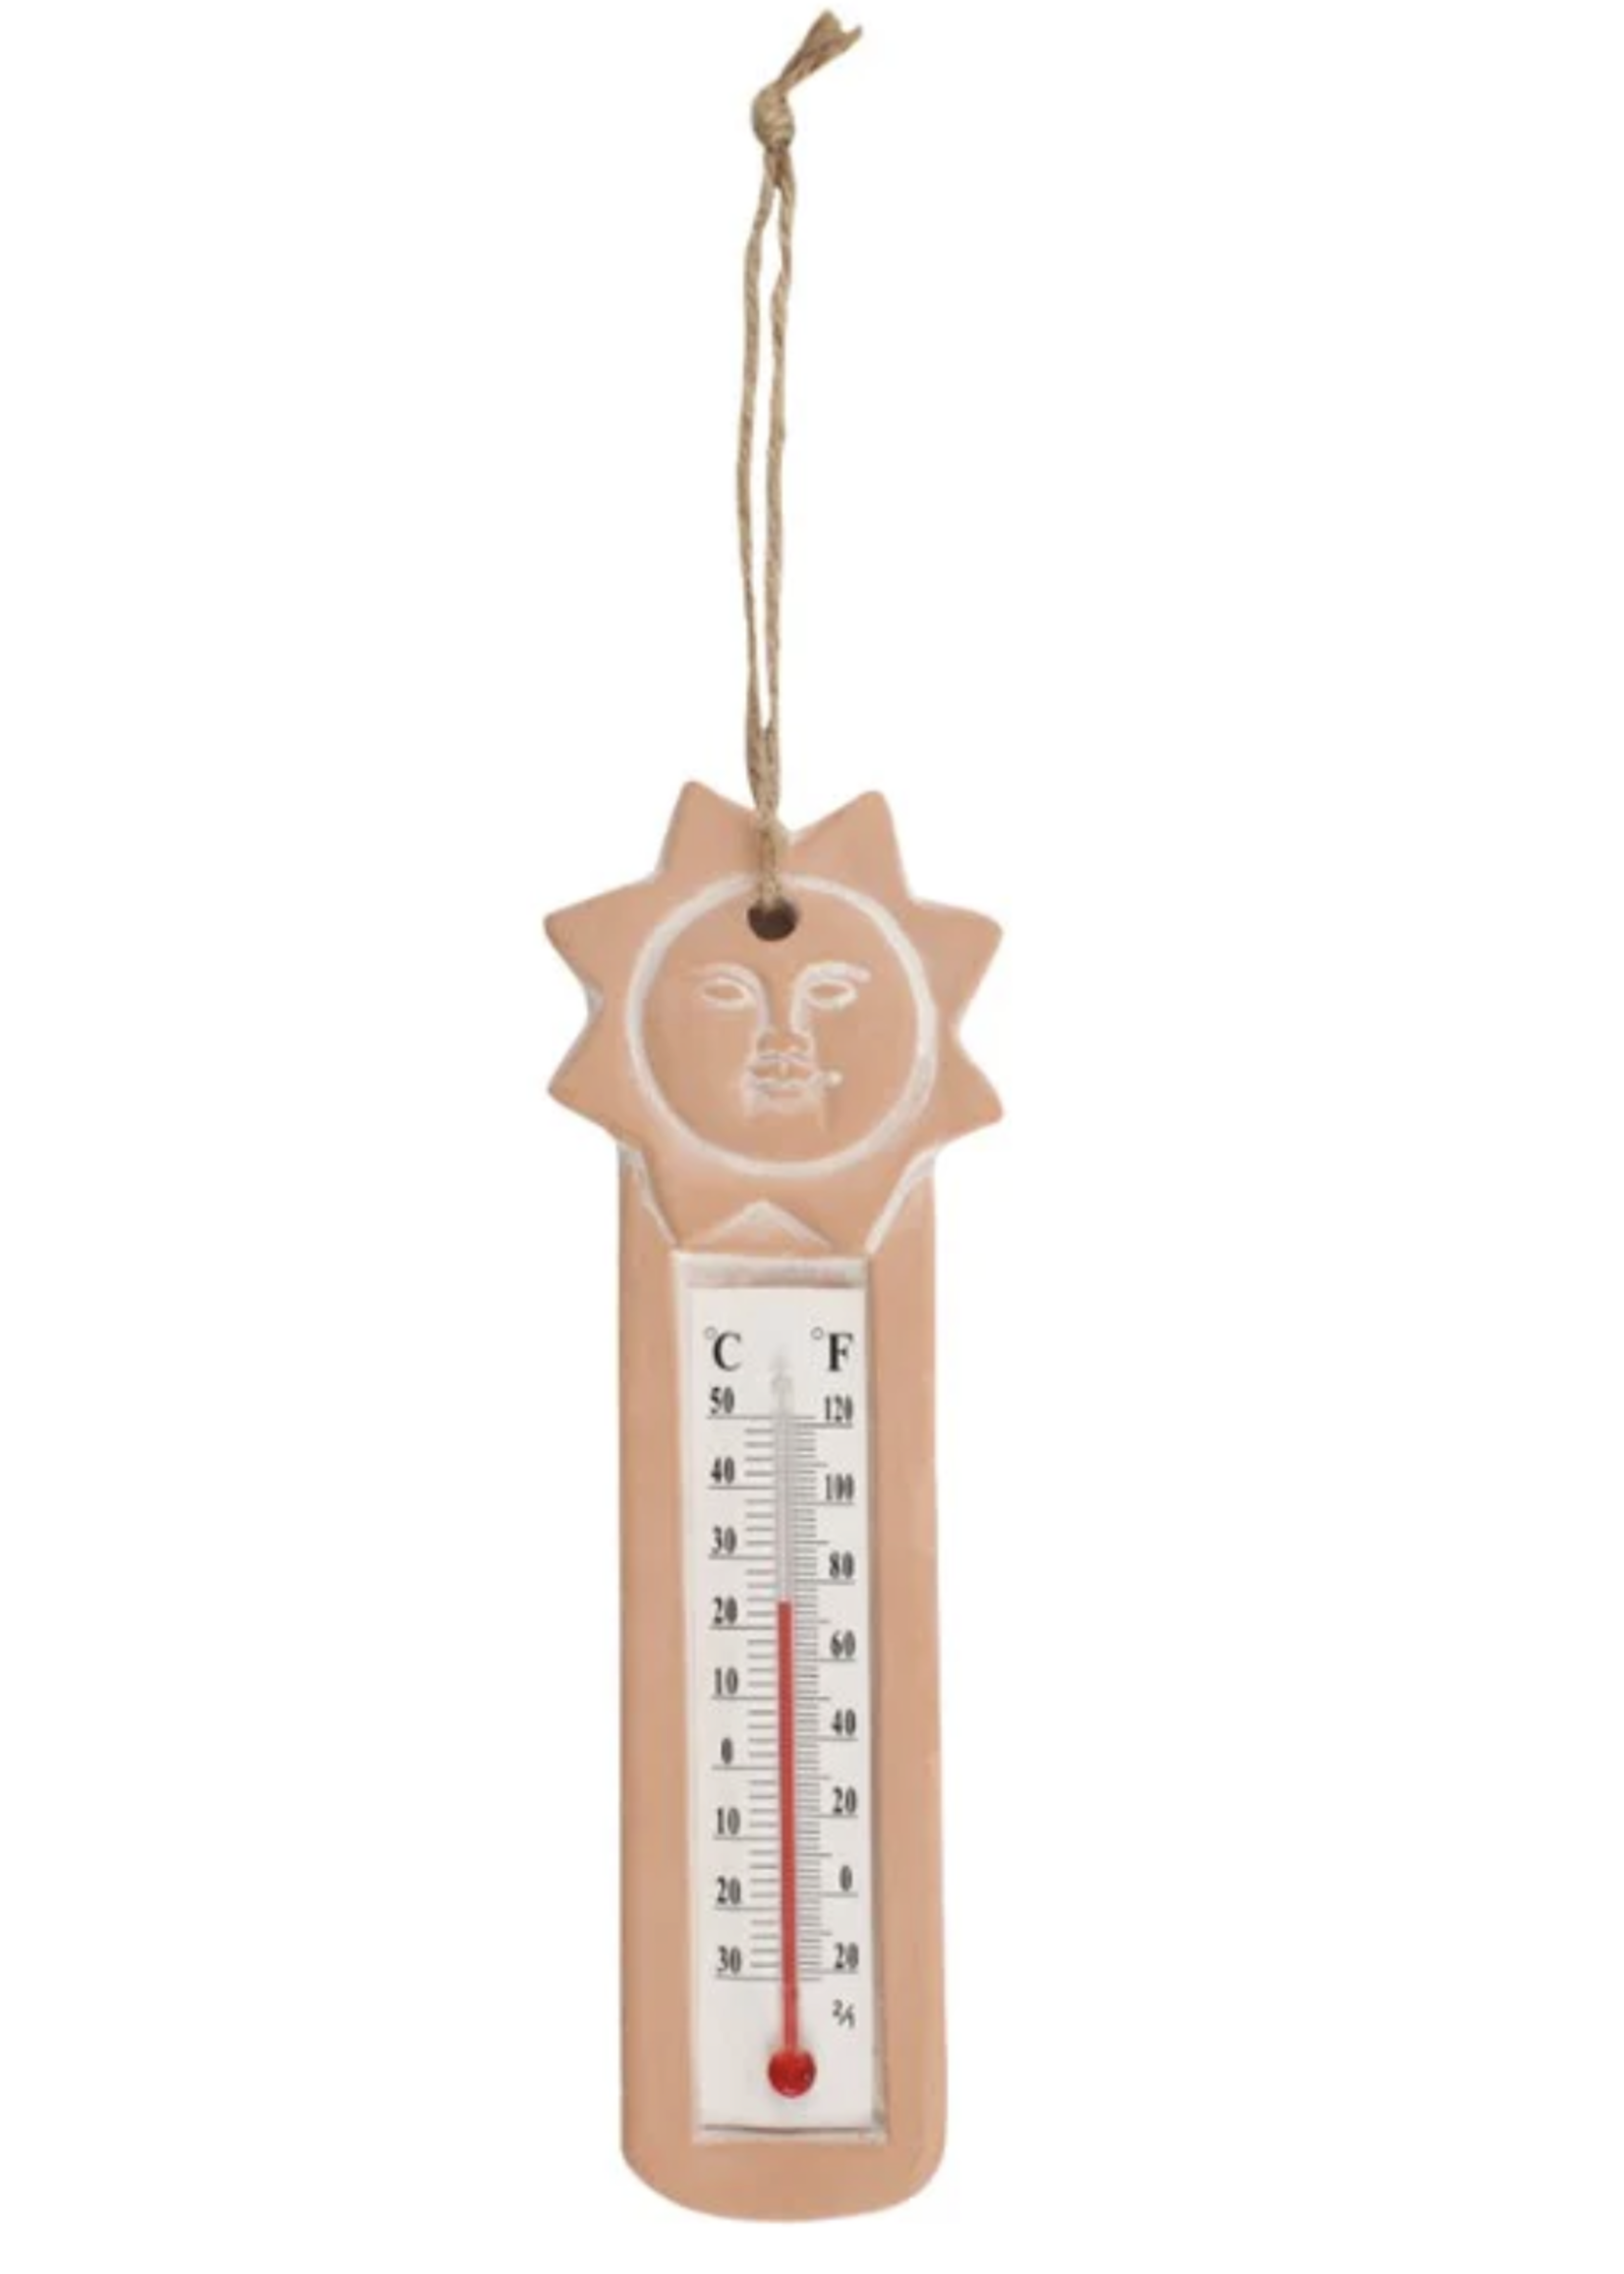 Something Different Terracotta Sun Thermometer